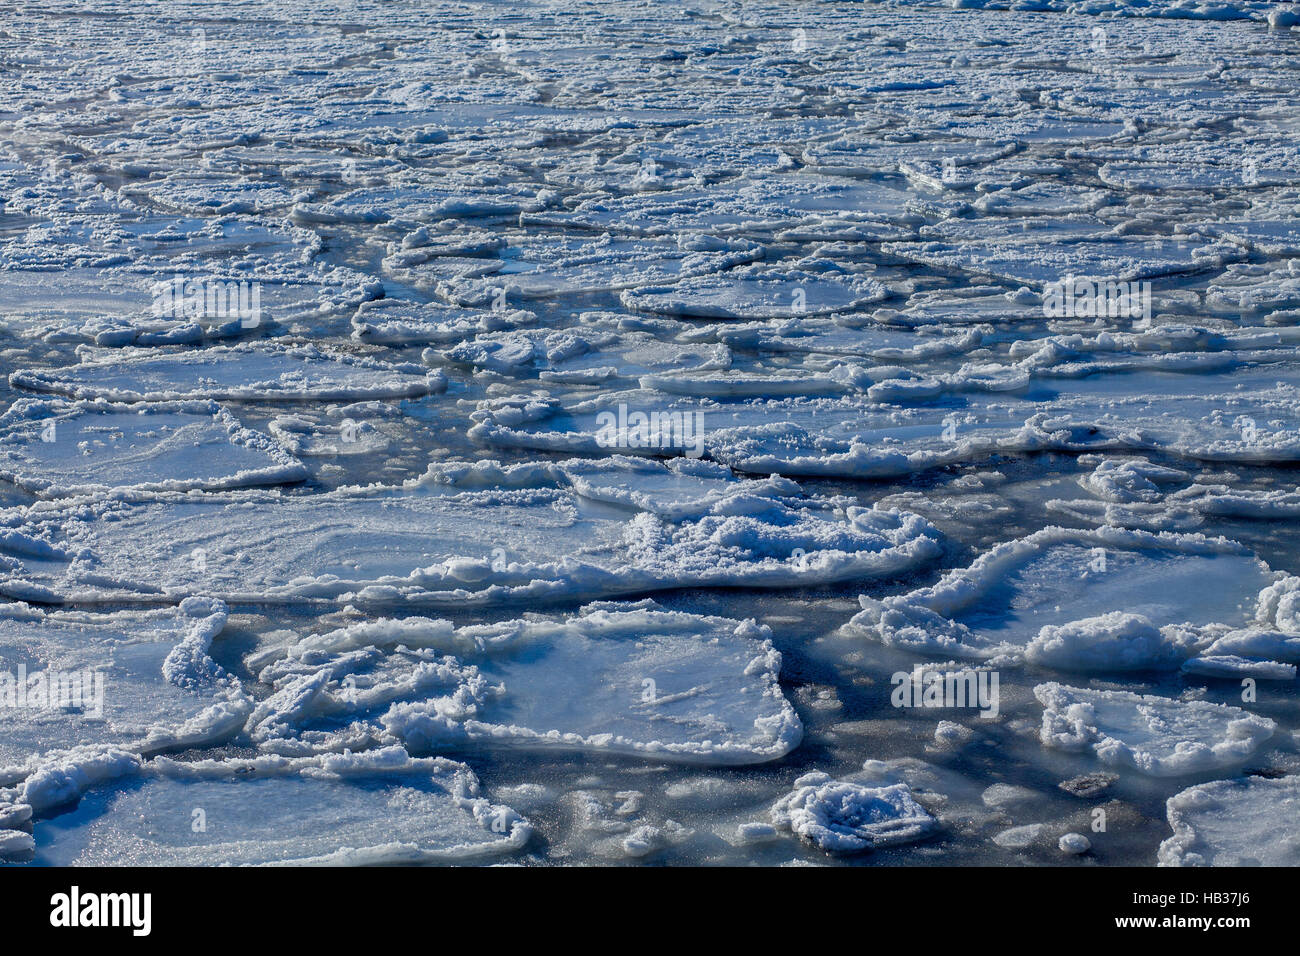 ice floes in the water Stock Photo